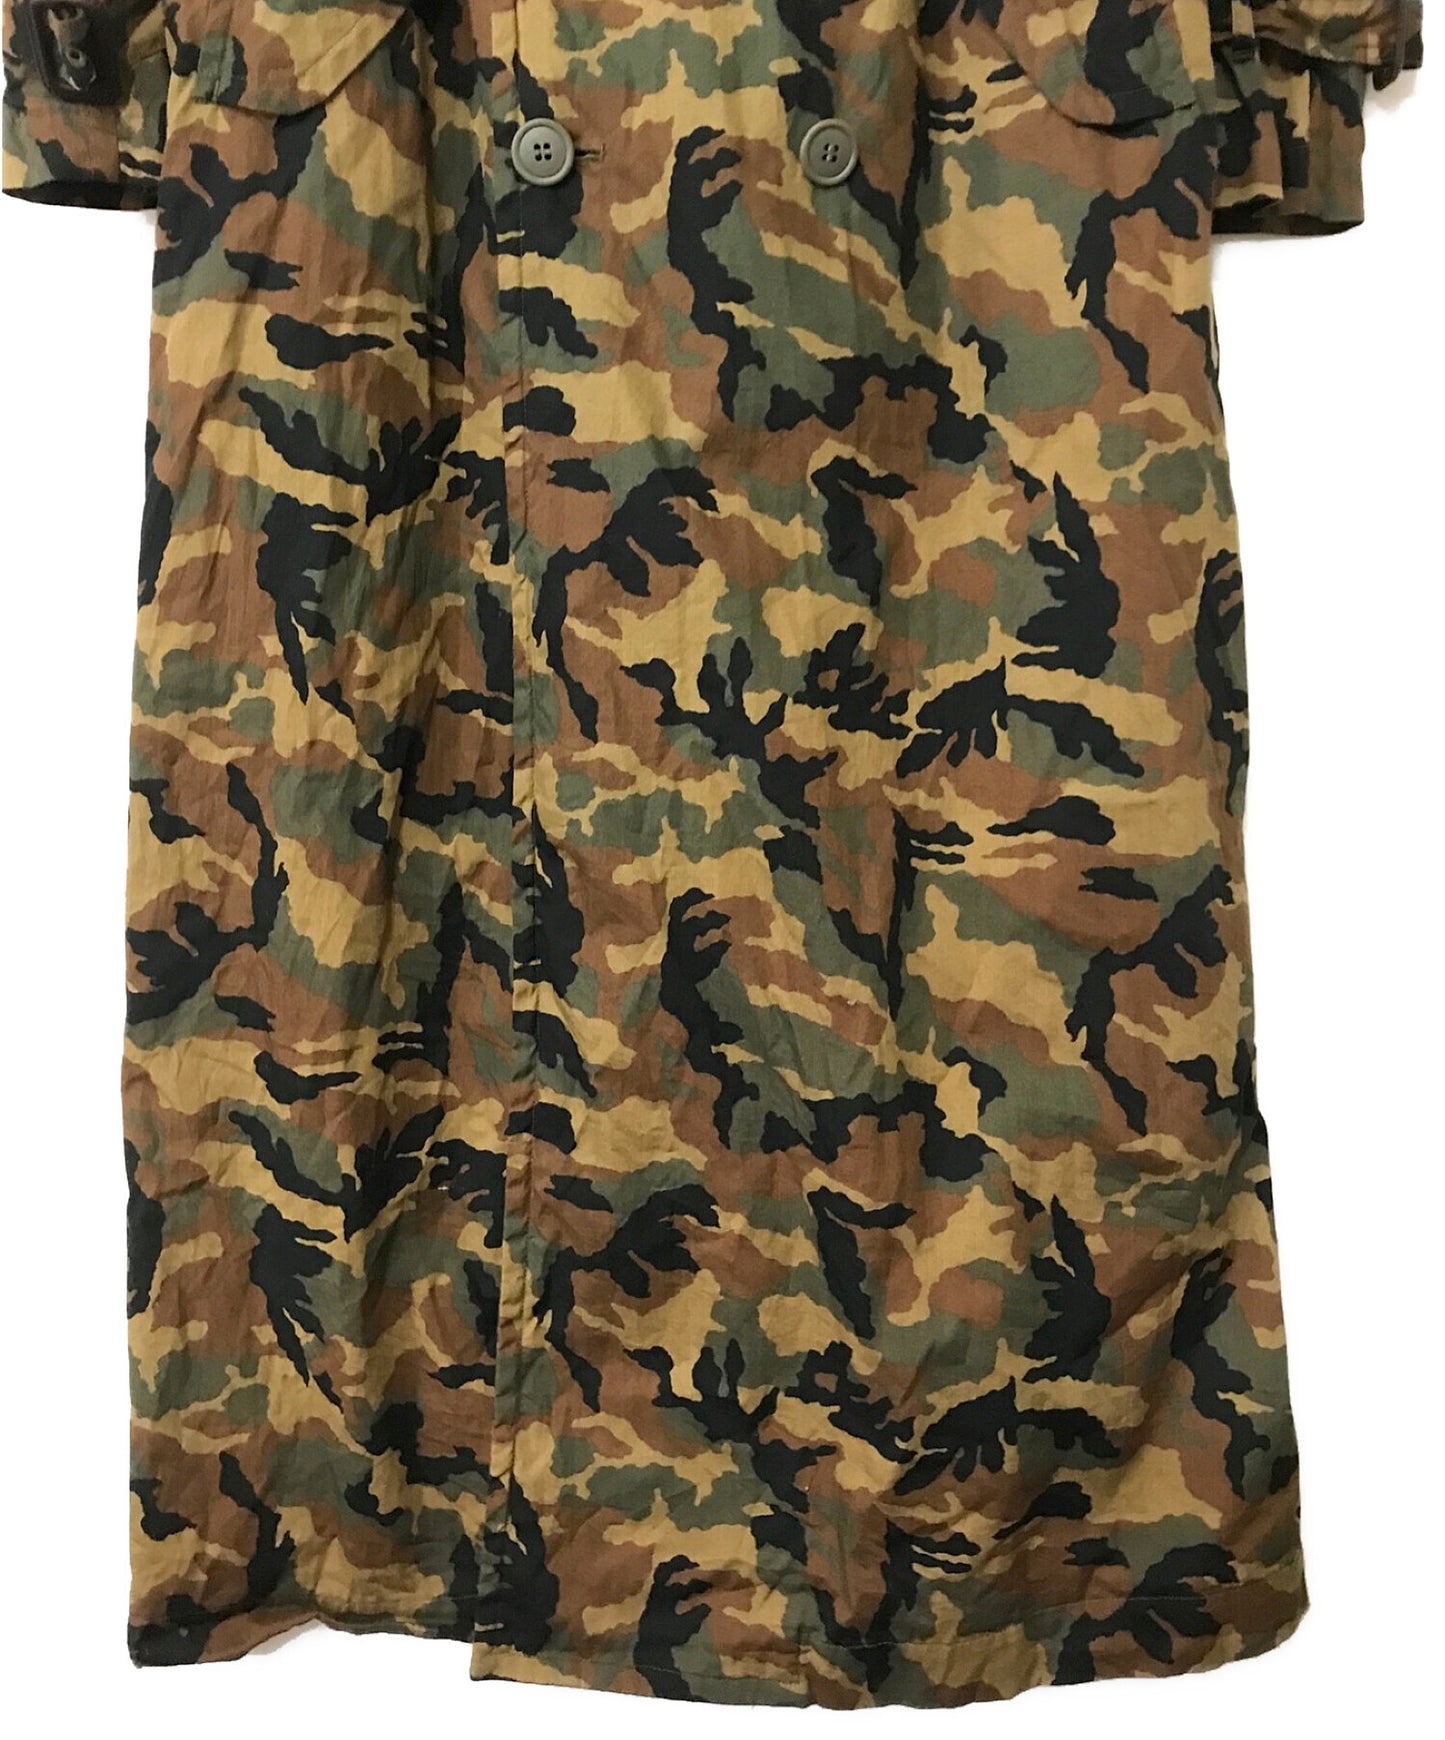 [Pre-owned] COMME des GARCONS Camo Trench Coat KX-814220